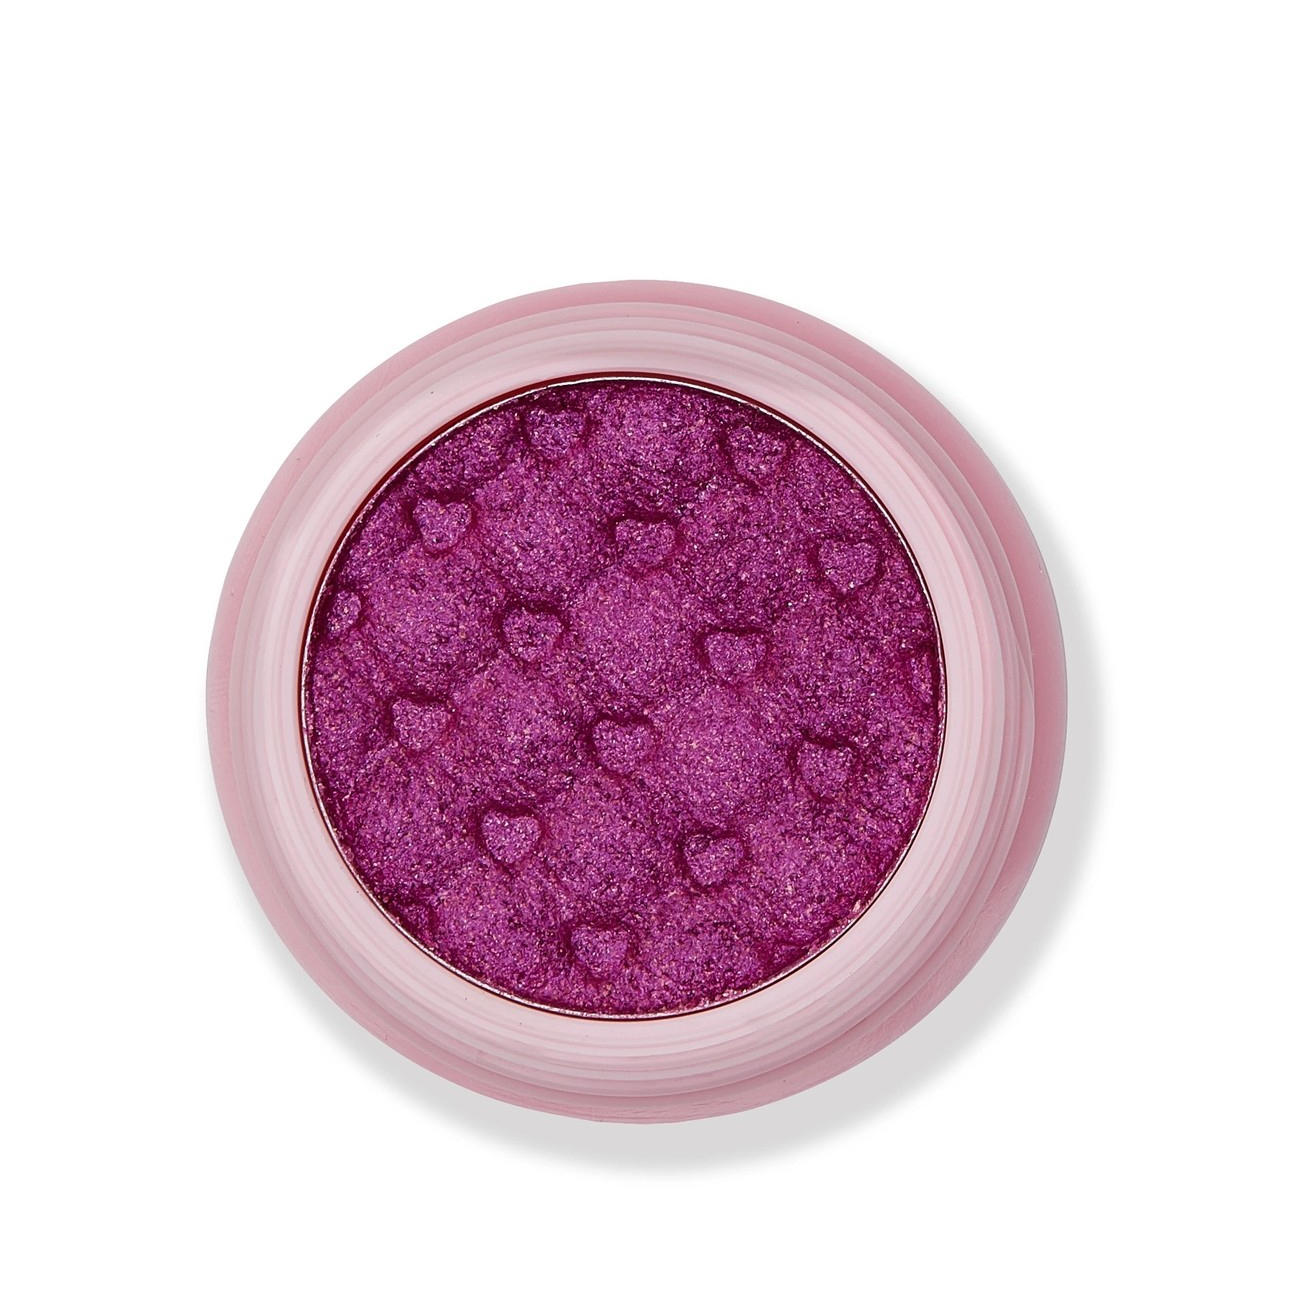 Ace Beaute Glimmer Shadow Huckleberry